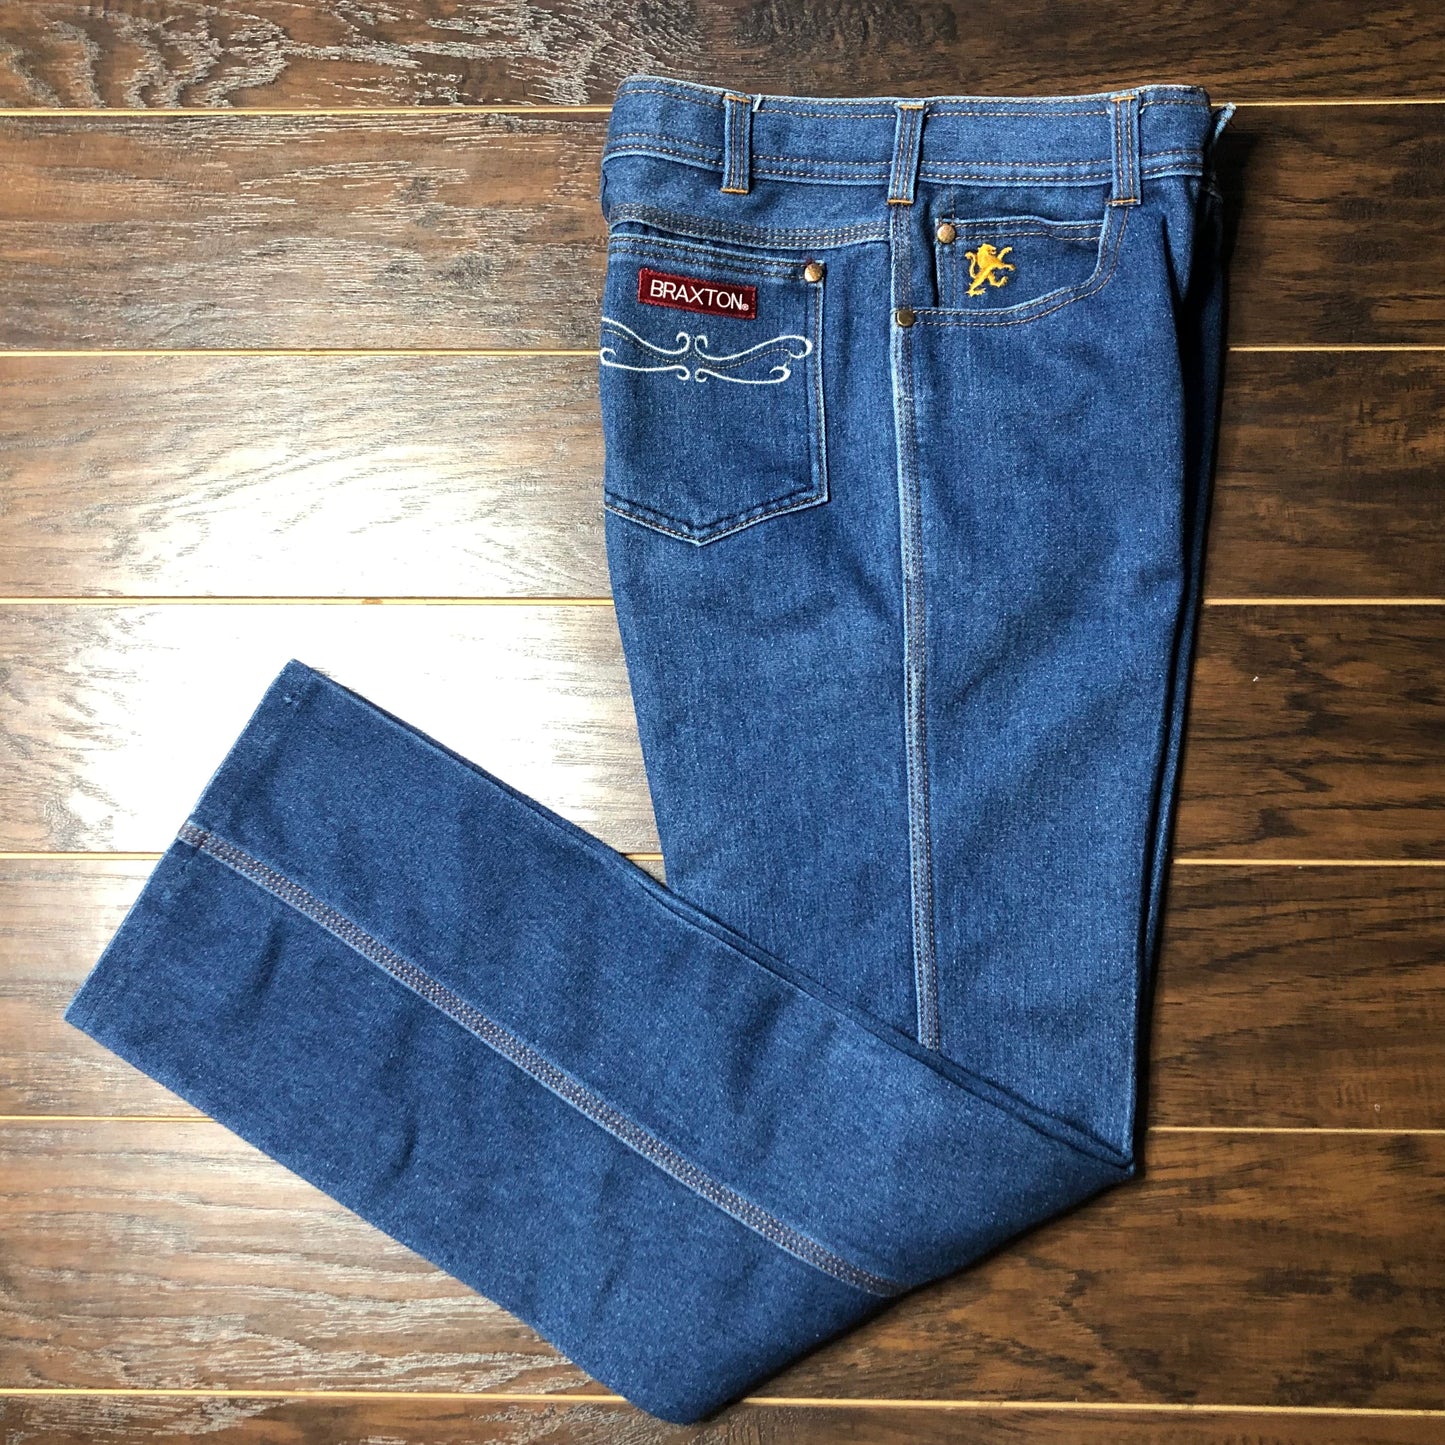 80’s Vintage Women’s Braxton High Waisted Jeans Made in Taiwan